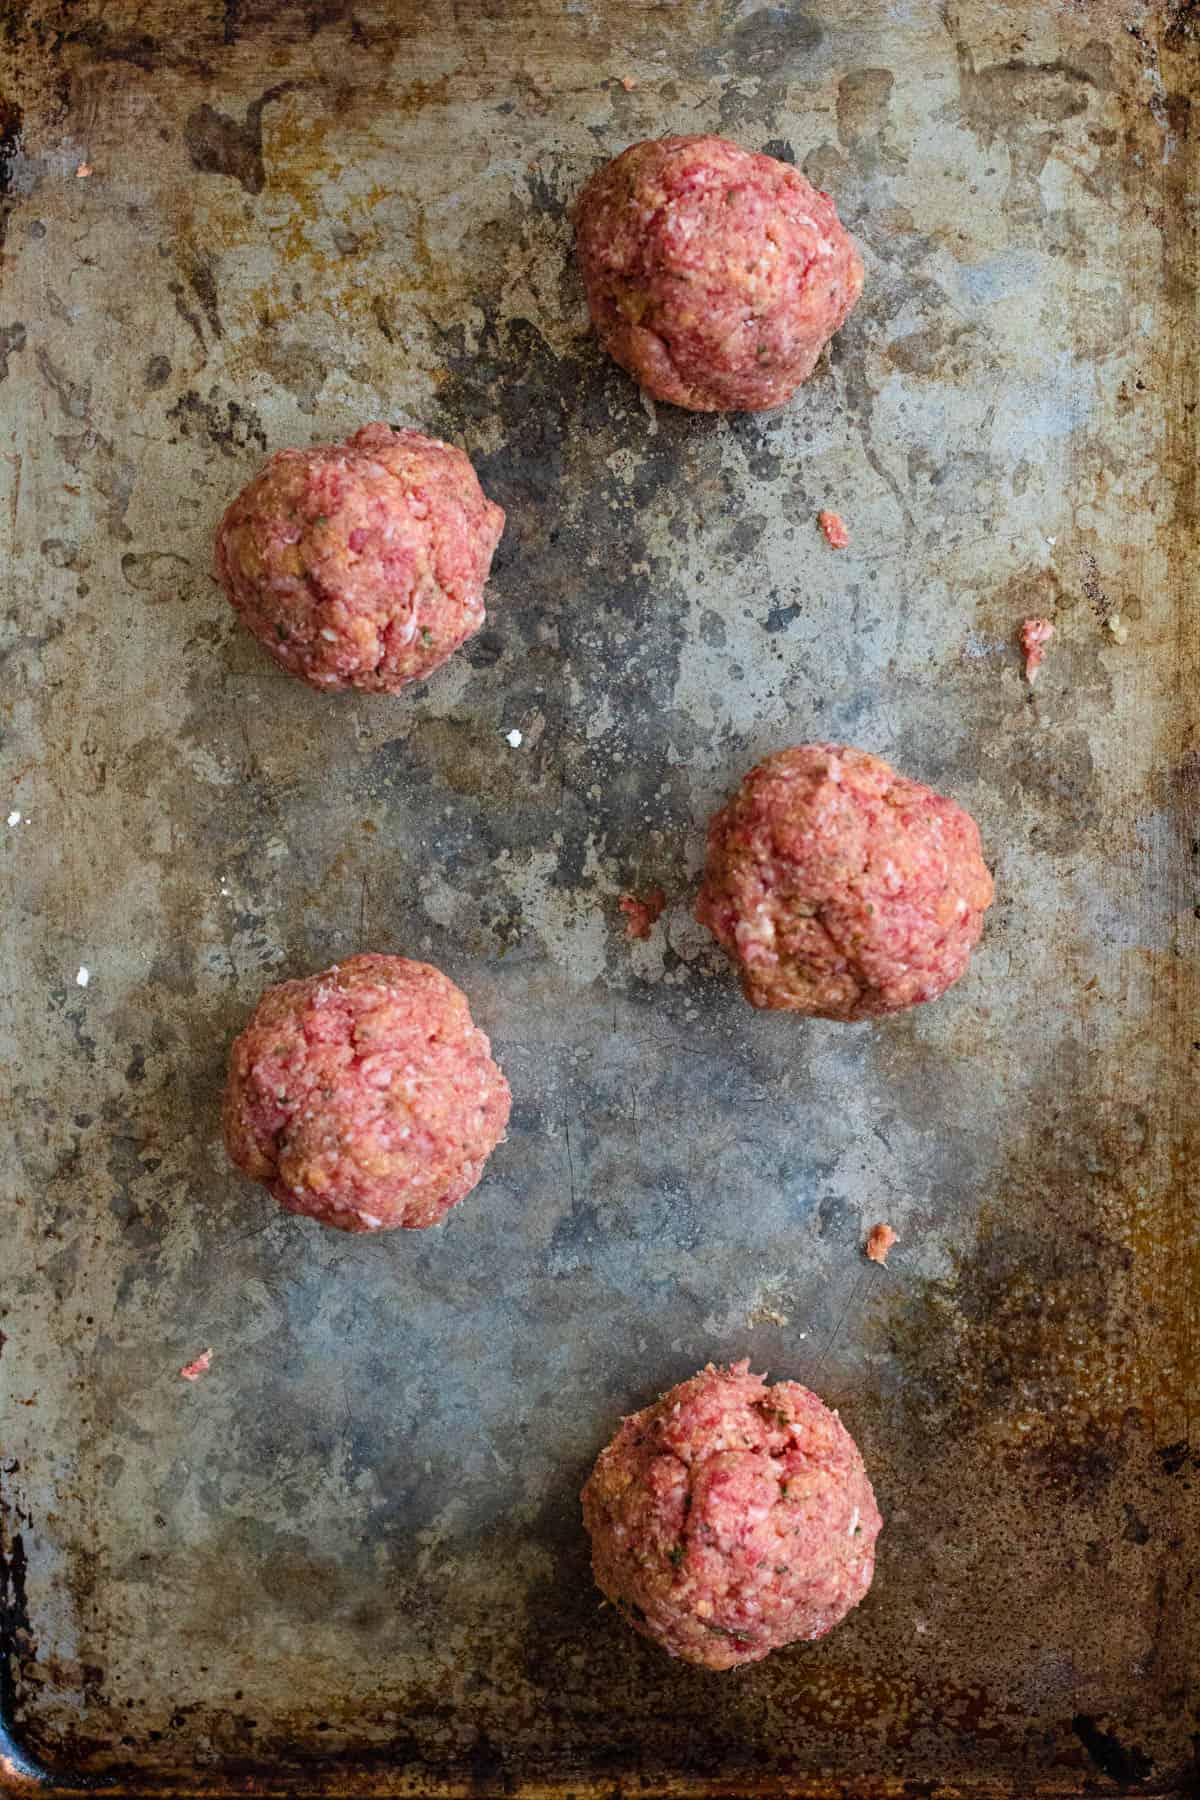 Meatballs formed into balls and placed on a baking sheet. 